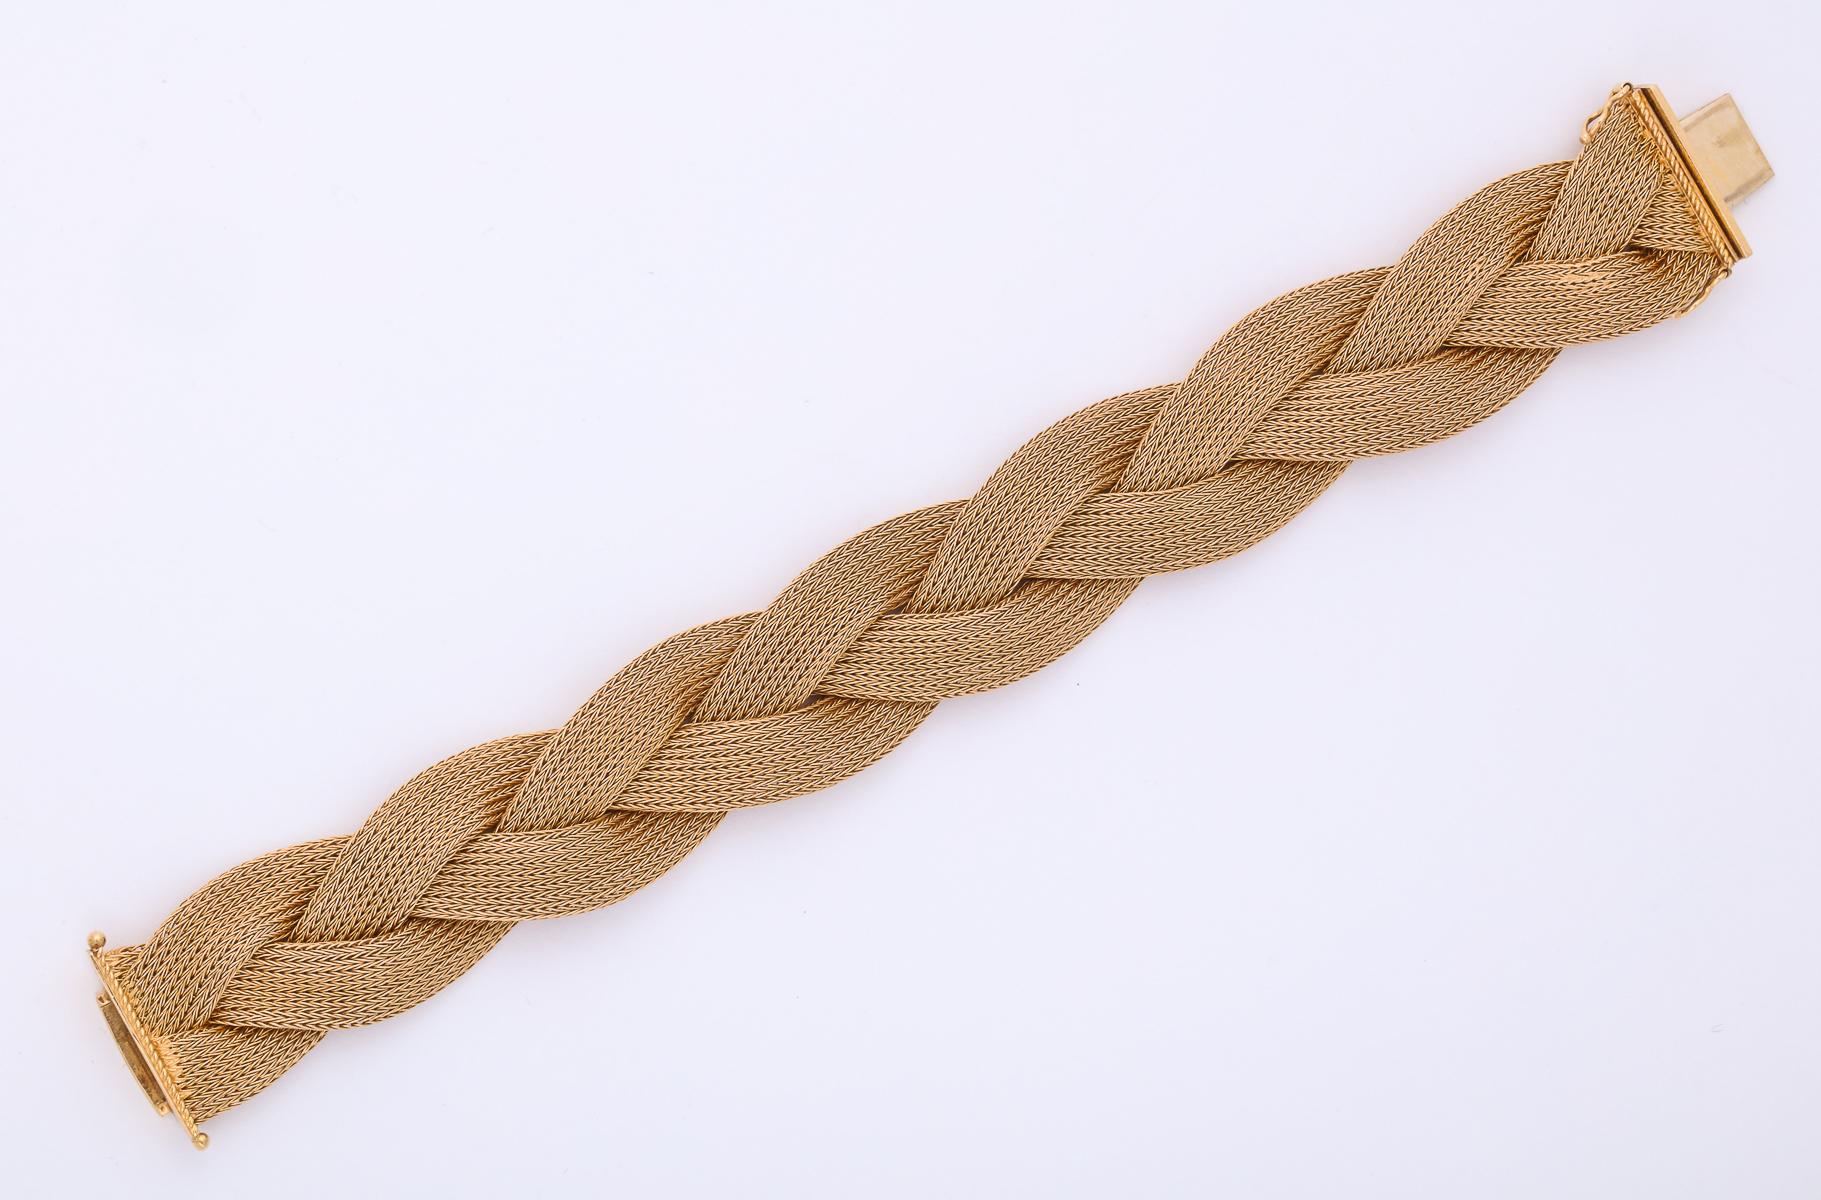 One Ladies 18kt Gold Twisted Soft Mesh Intertwined Braided Bracelet. Created In Italy In The 1950's. Great For Everyday Wear Stamped FF Makers Mark And Marked 750.